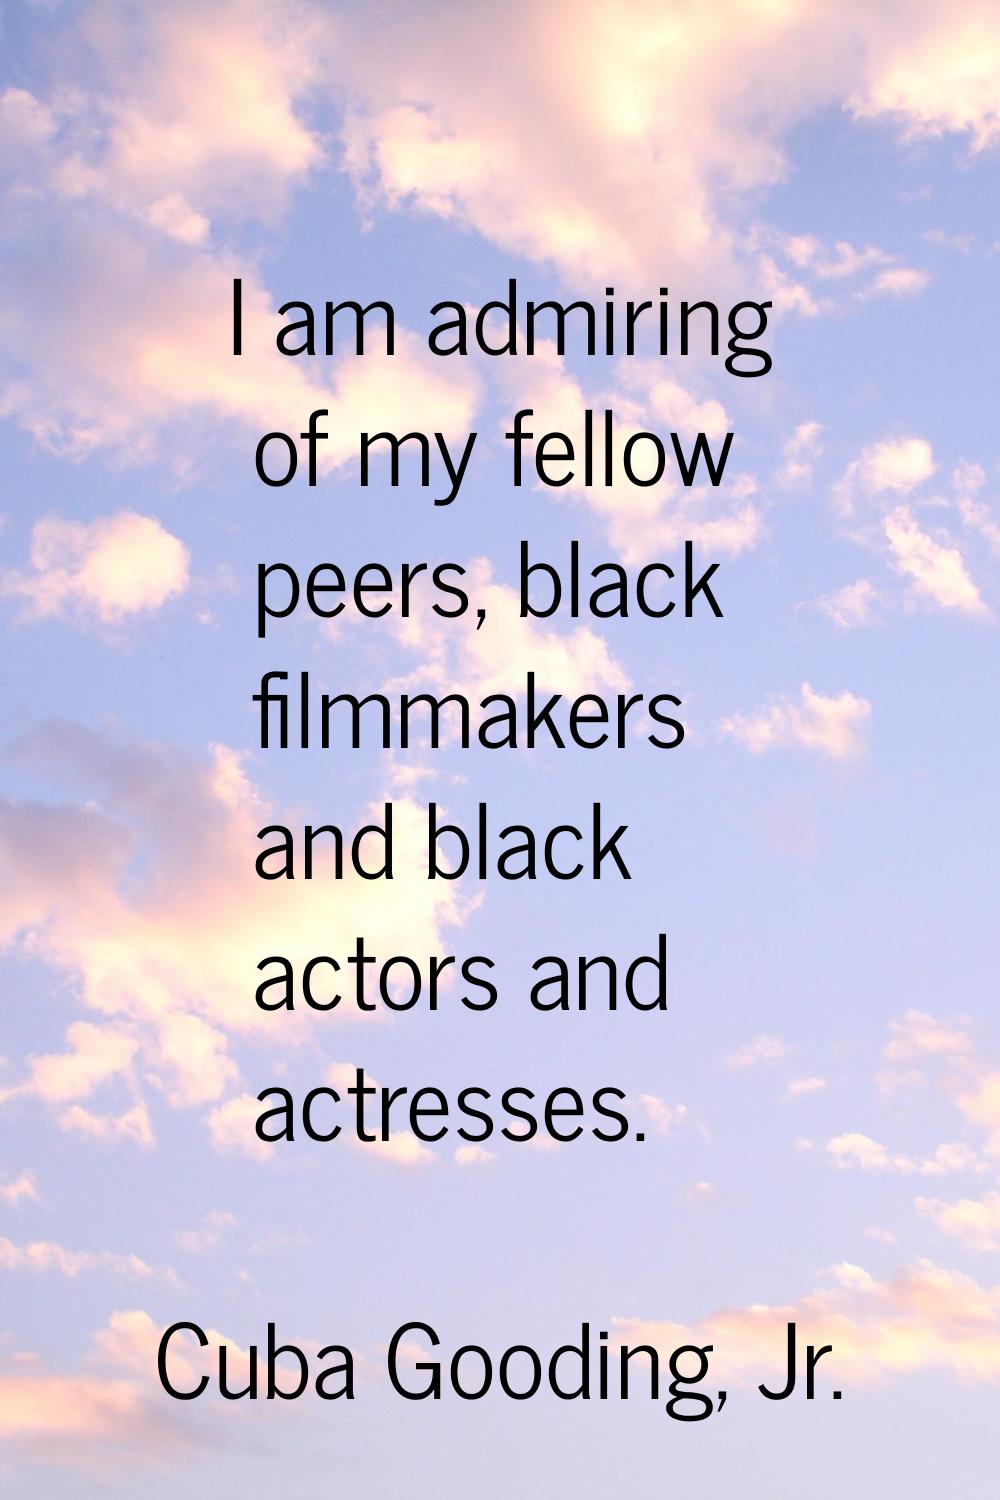 I am admiring of my fellow peers, black filmmakers and black actors and actresses.